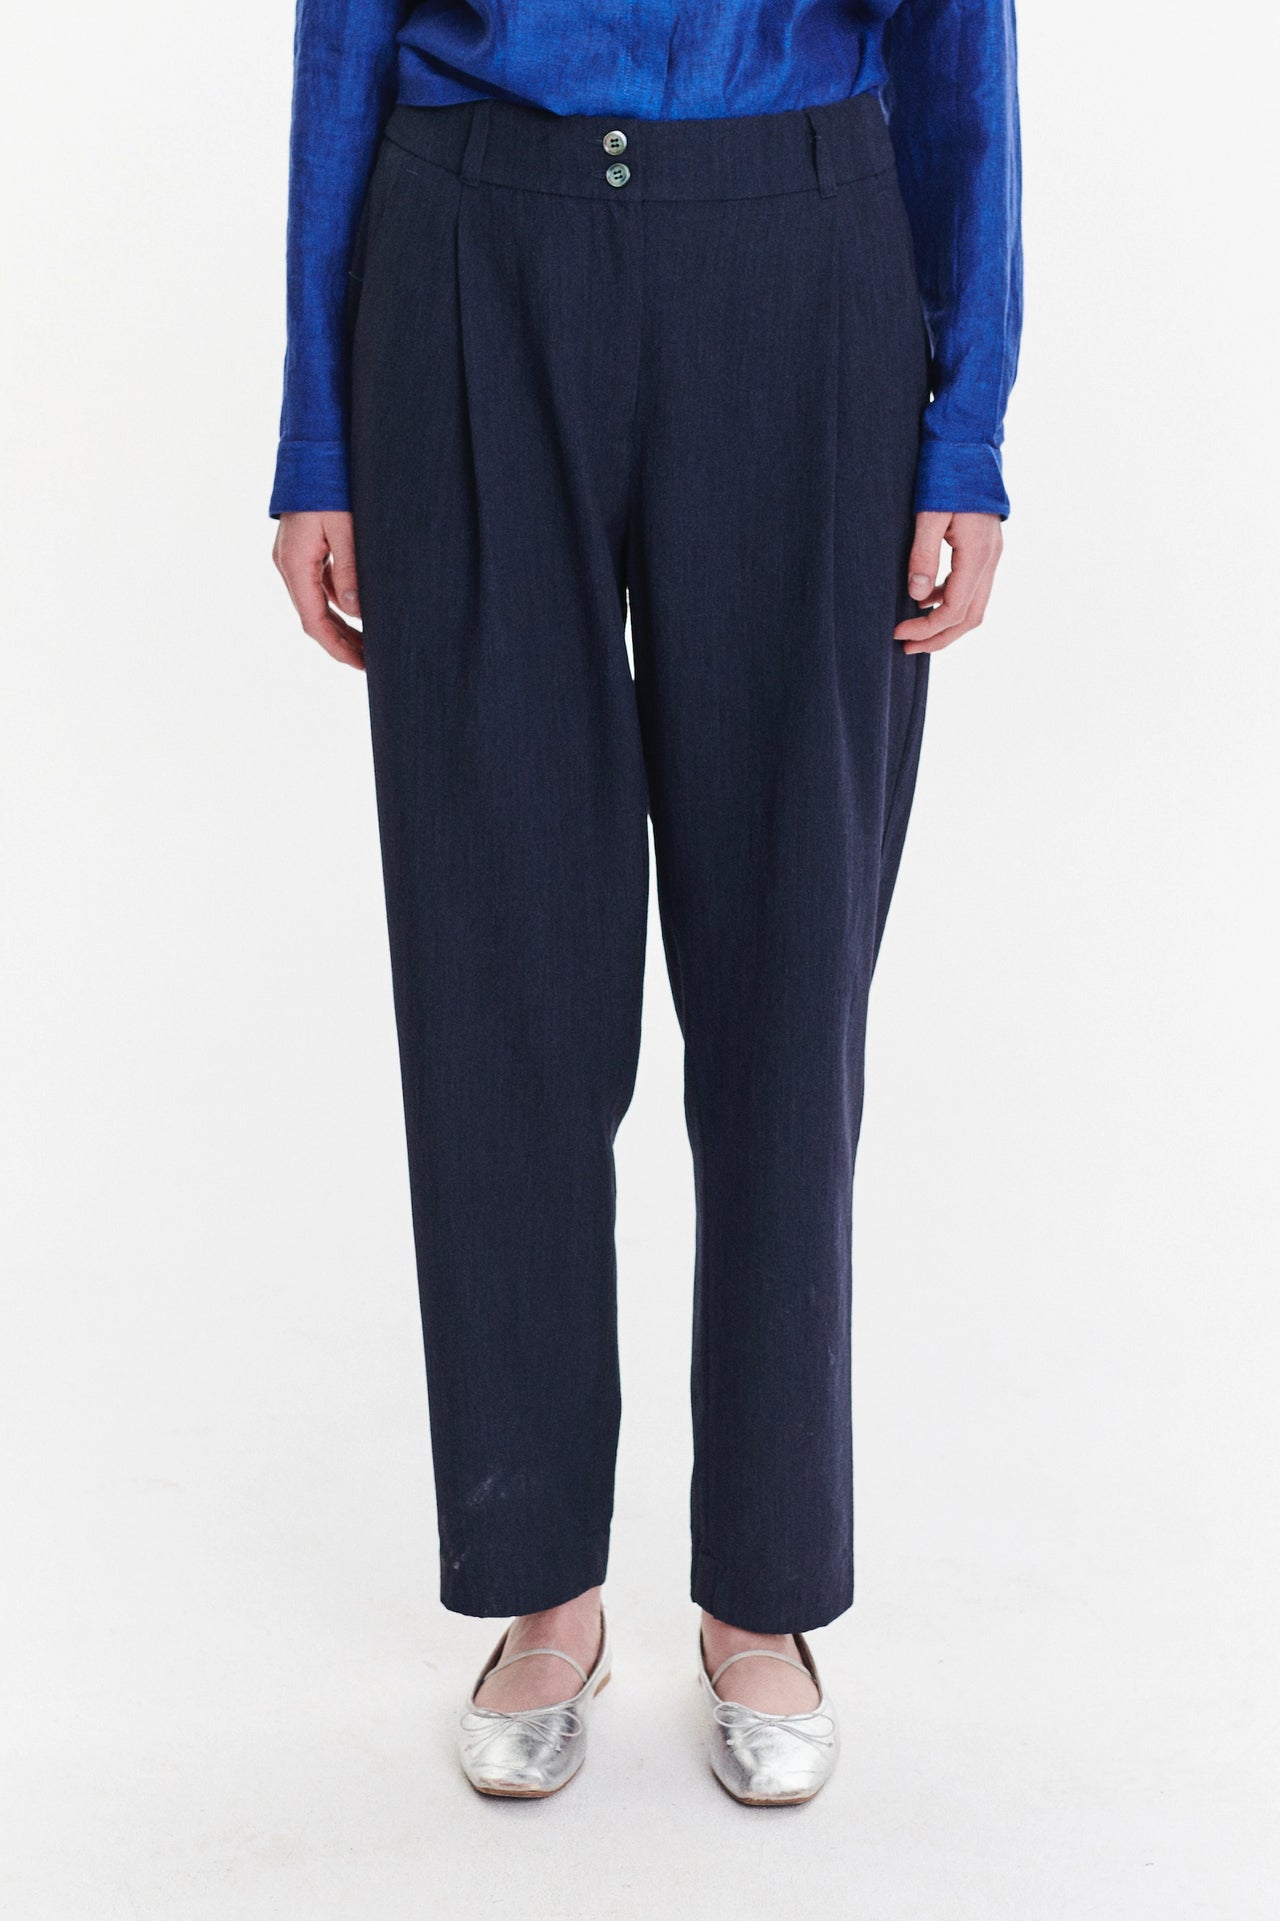 Genuine Trousers in a Navy Blue Fluid Mix of Italian Summer Wool and Viscose